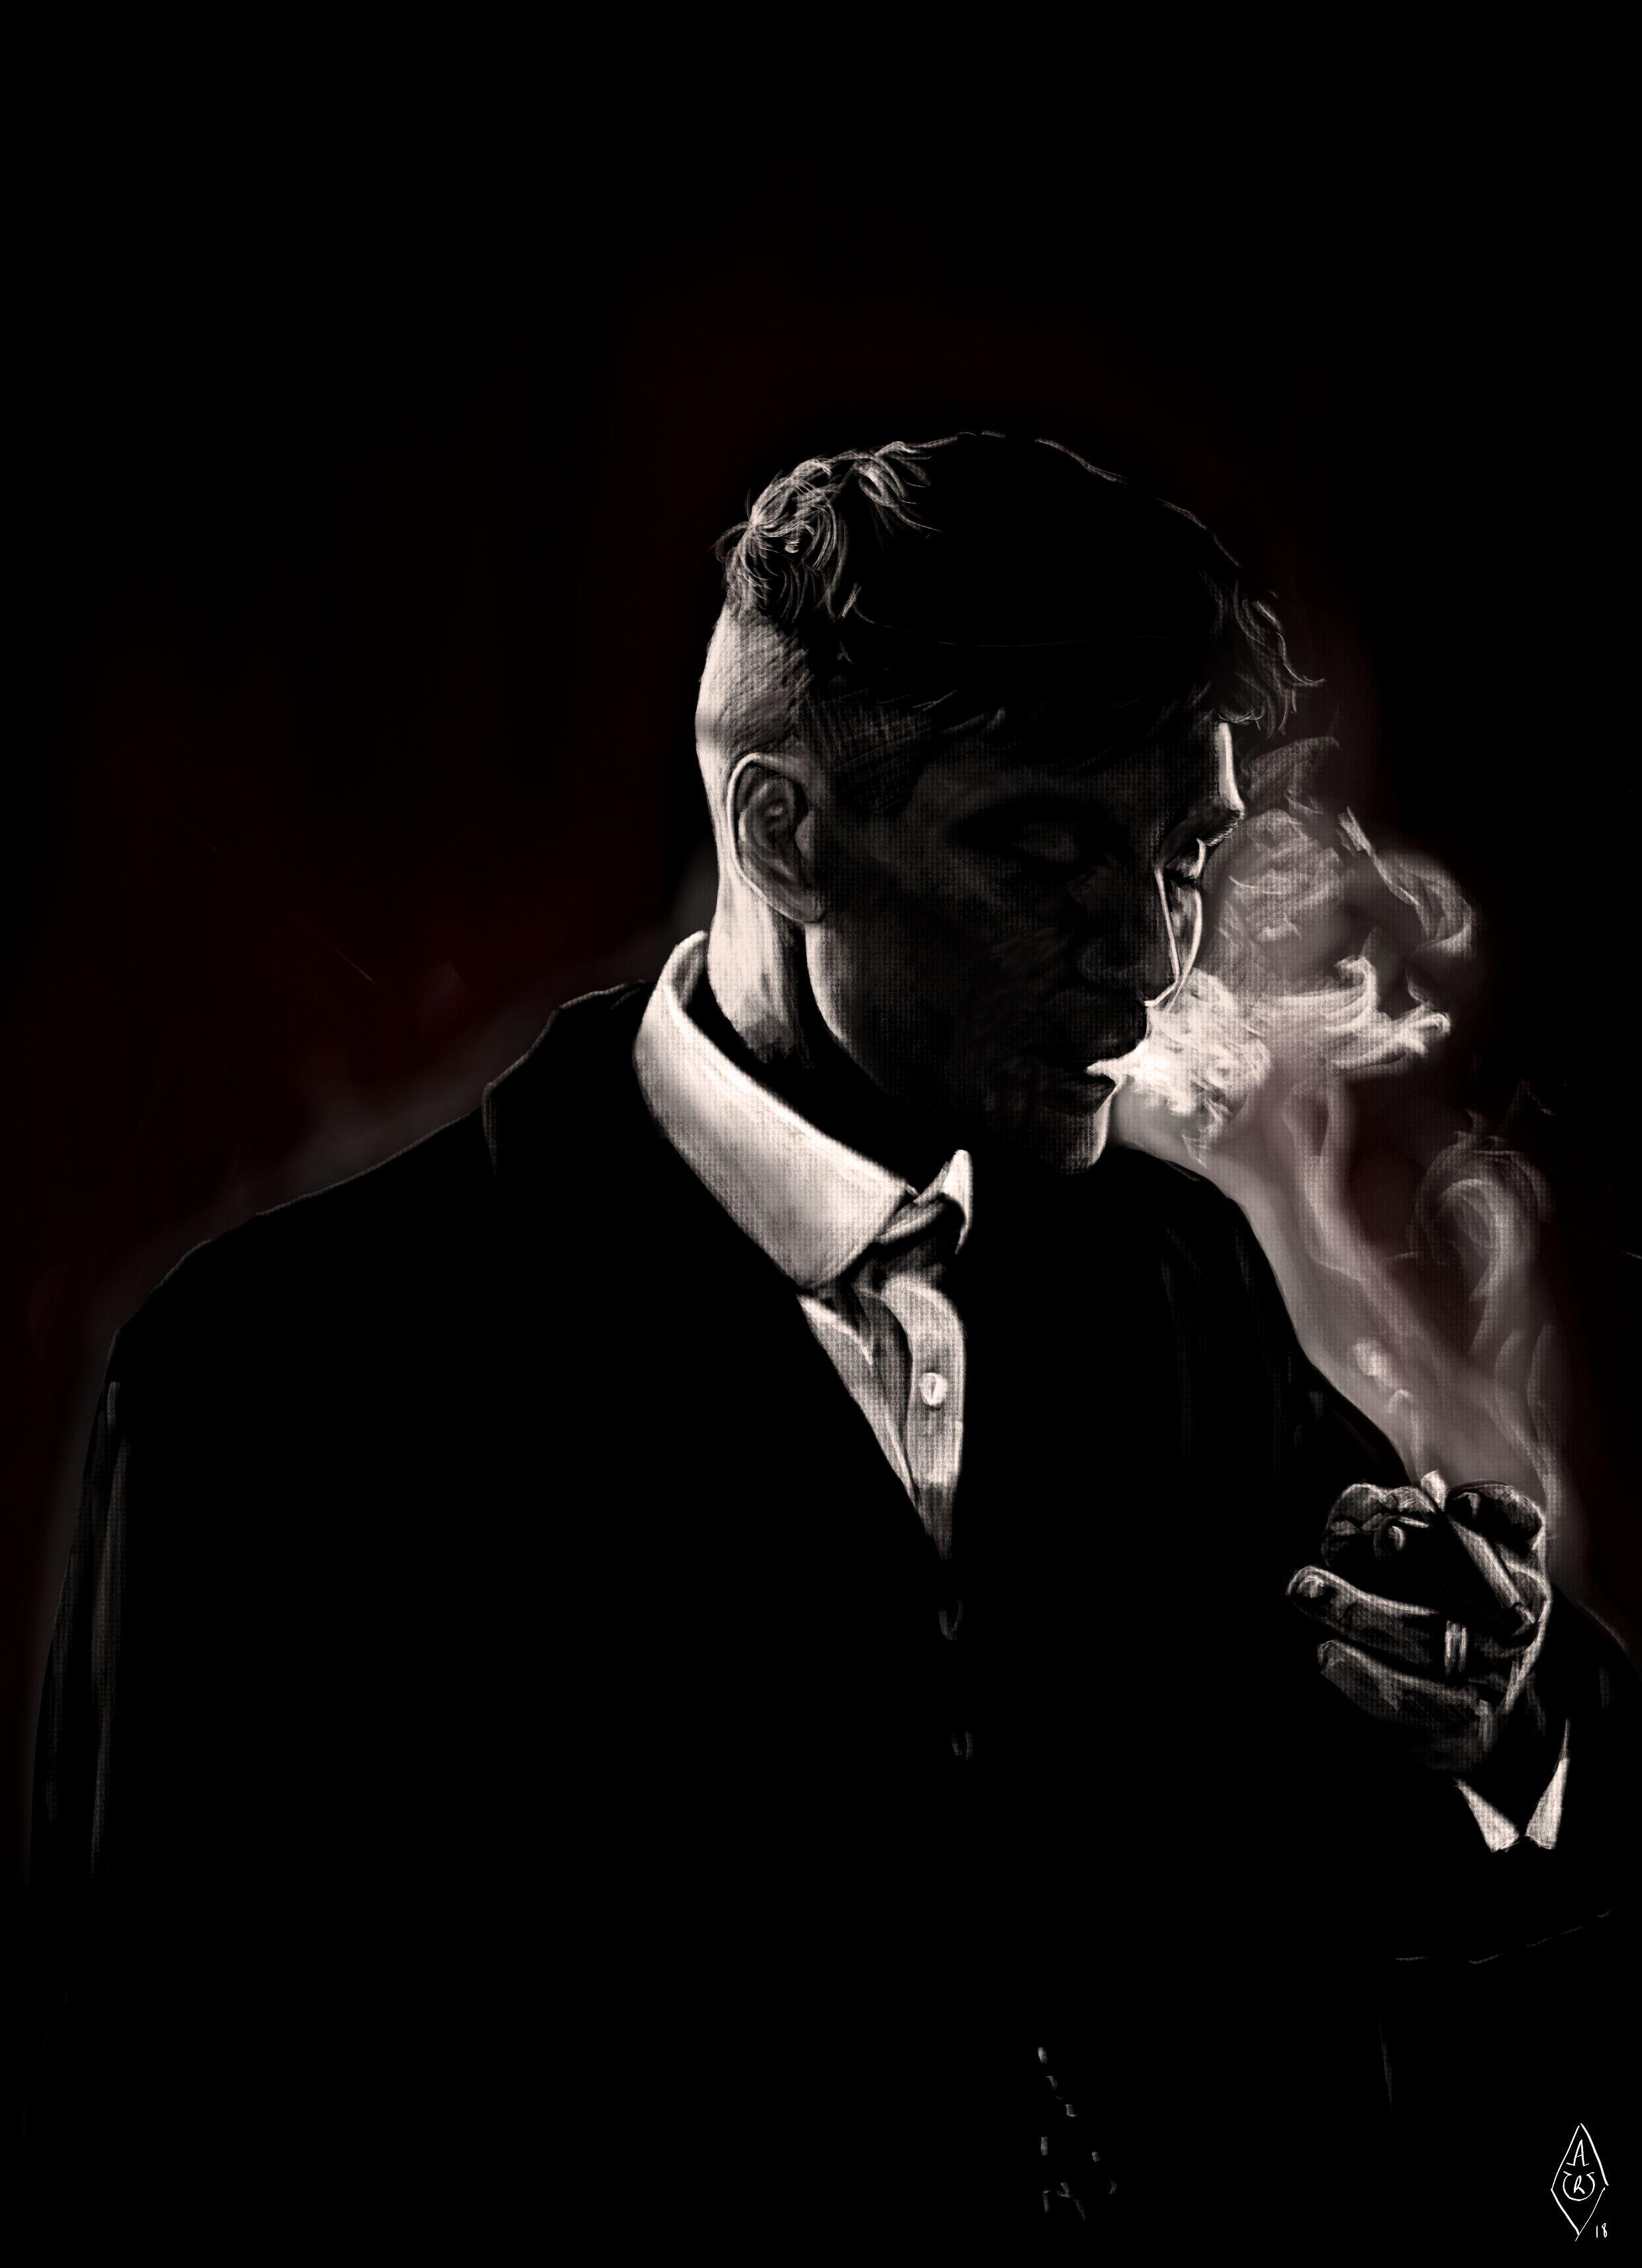 Portrait of Thomas Shelby from Peaky Blinders. Drawn with my